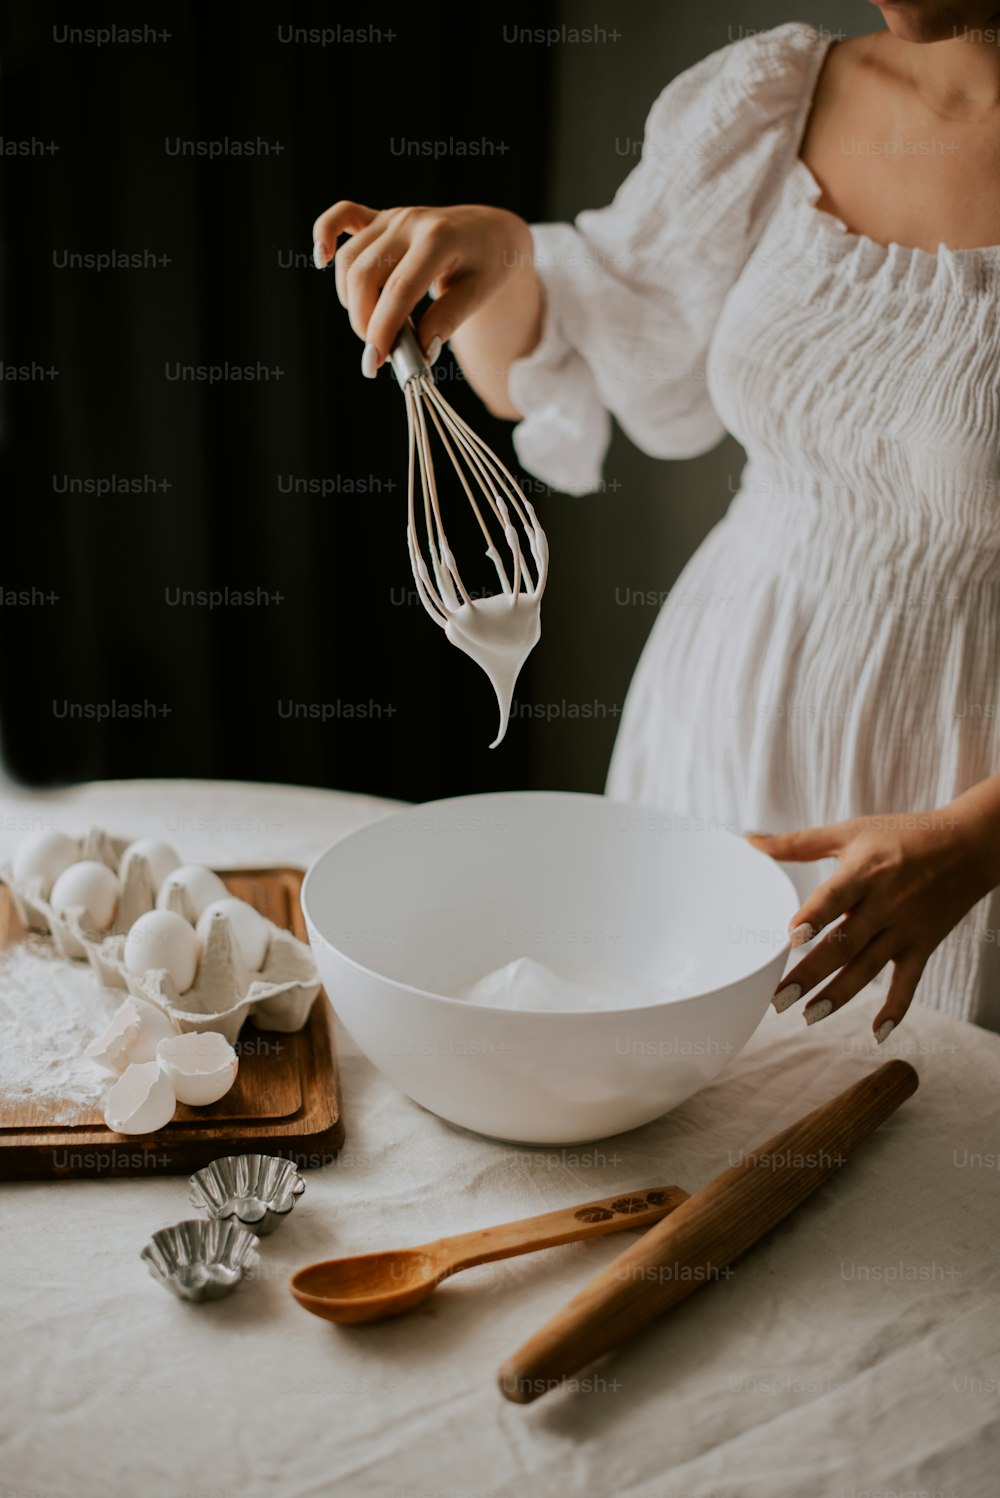 a woman in a white dress whisks eggs into a bowl